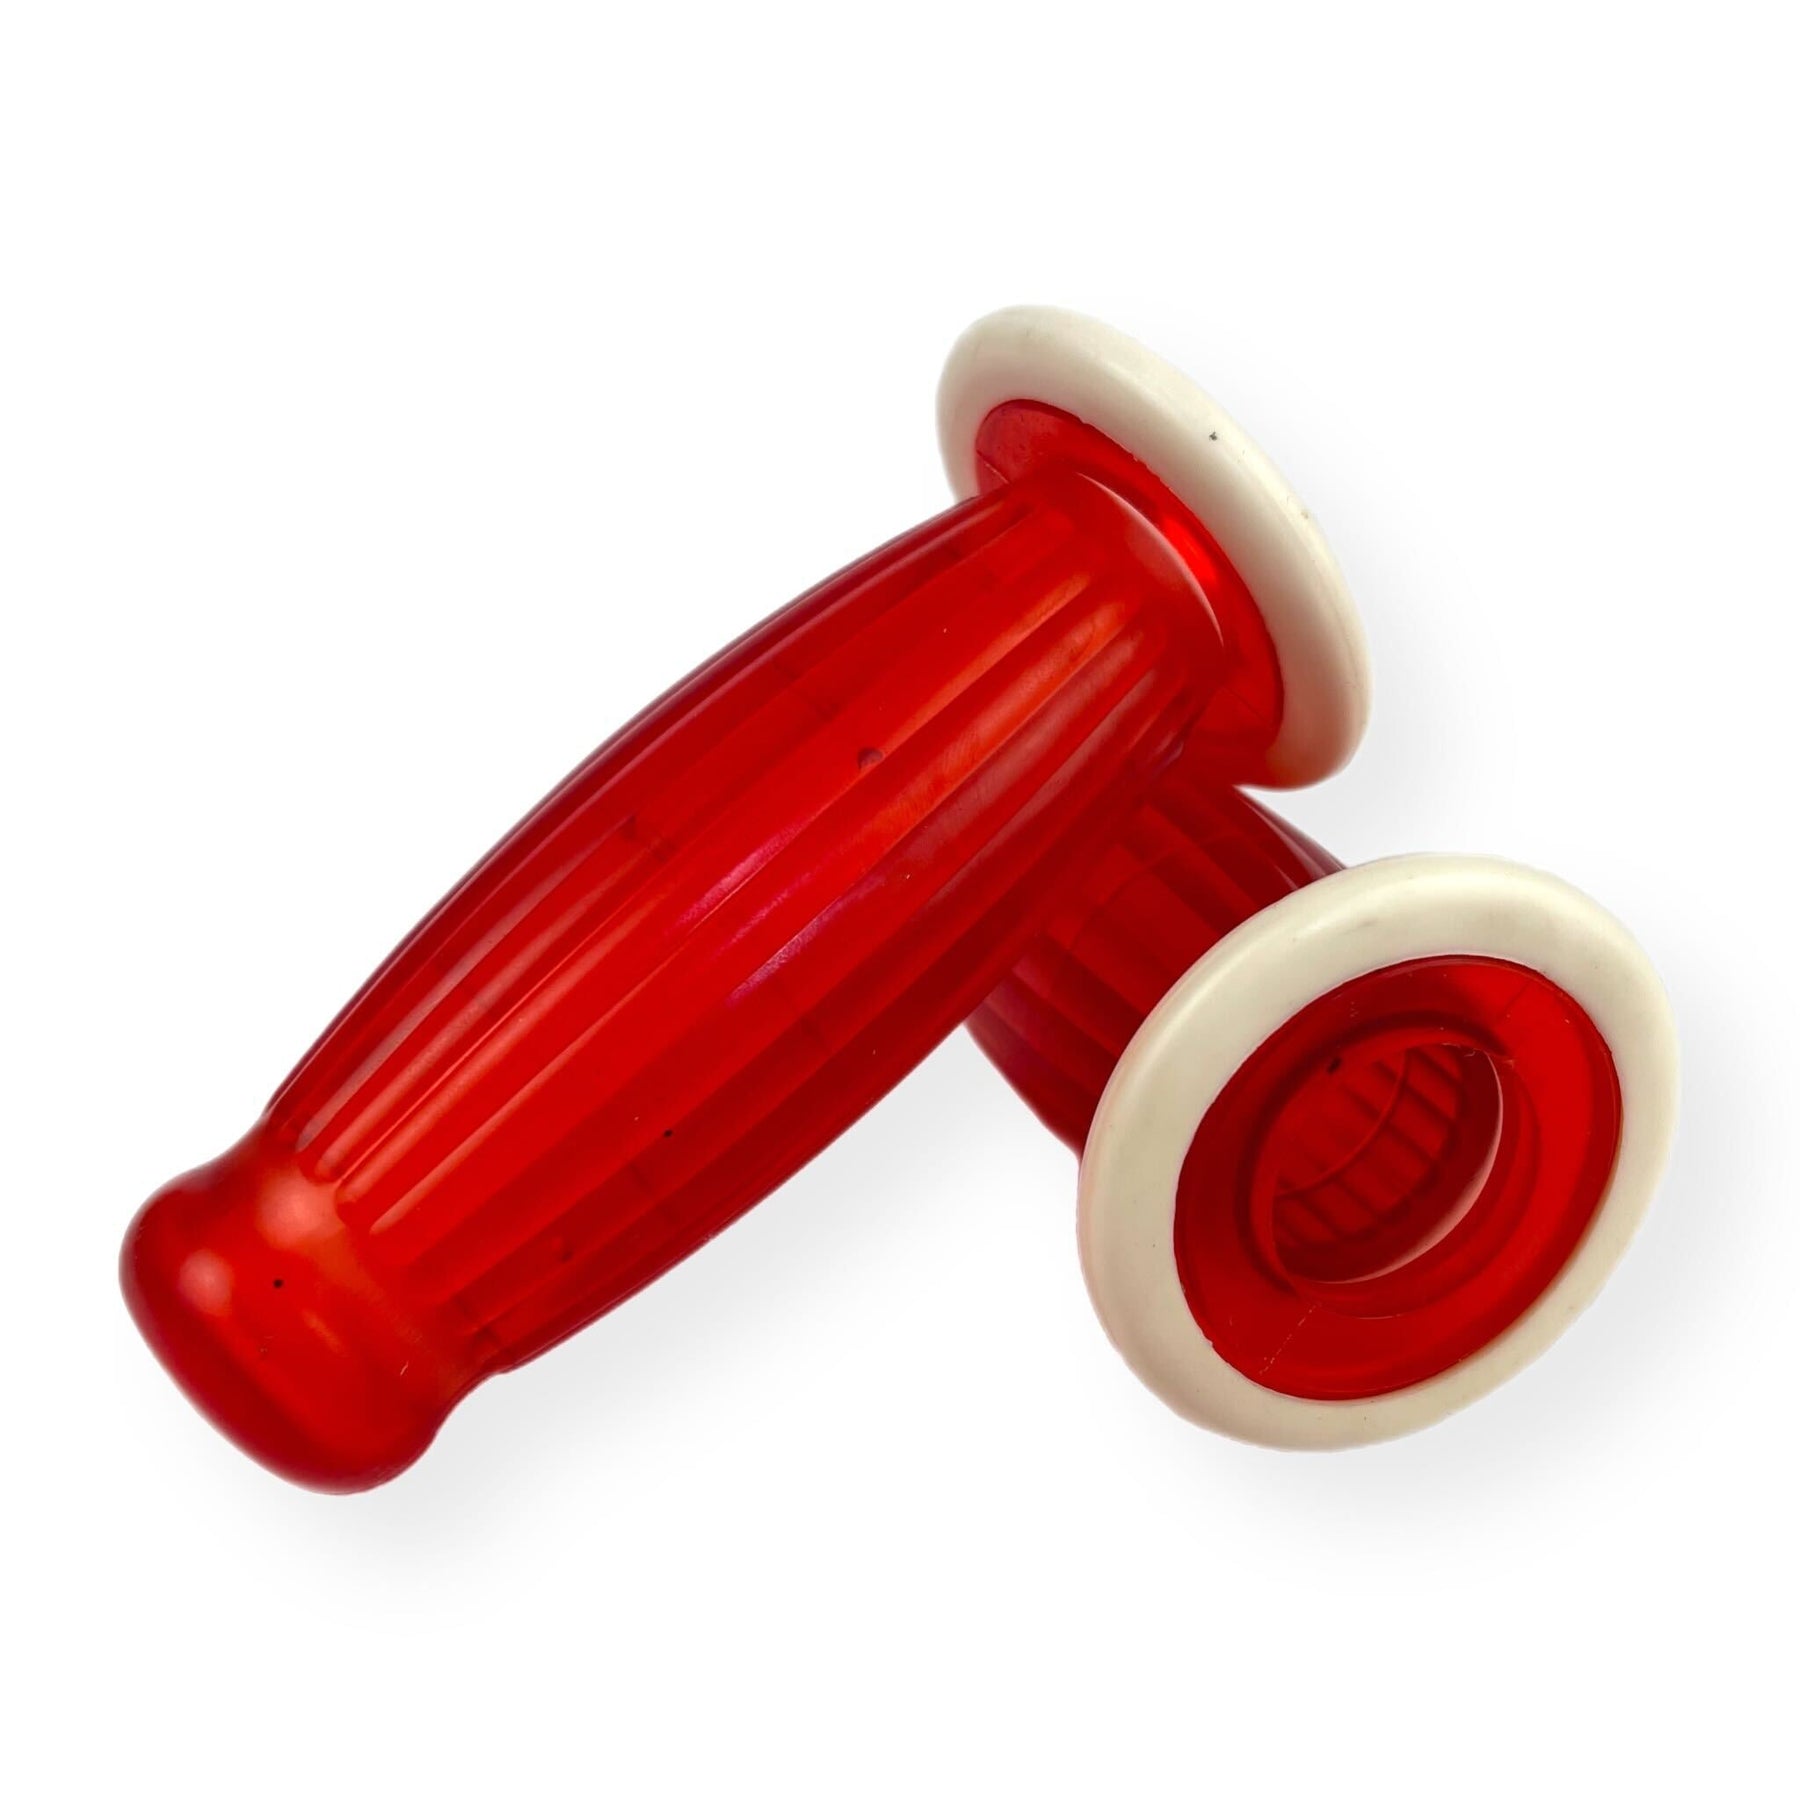 Vespa PX T5 Rally Super Balloon Grip and Lever Cover Bundle - Red